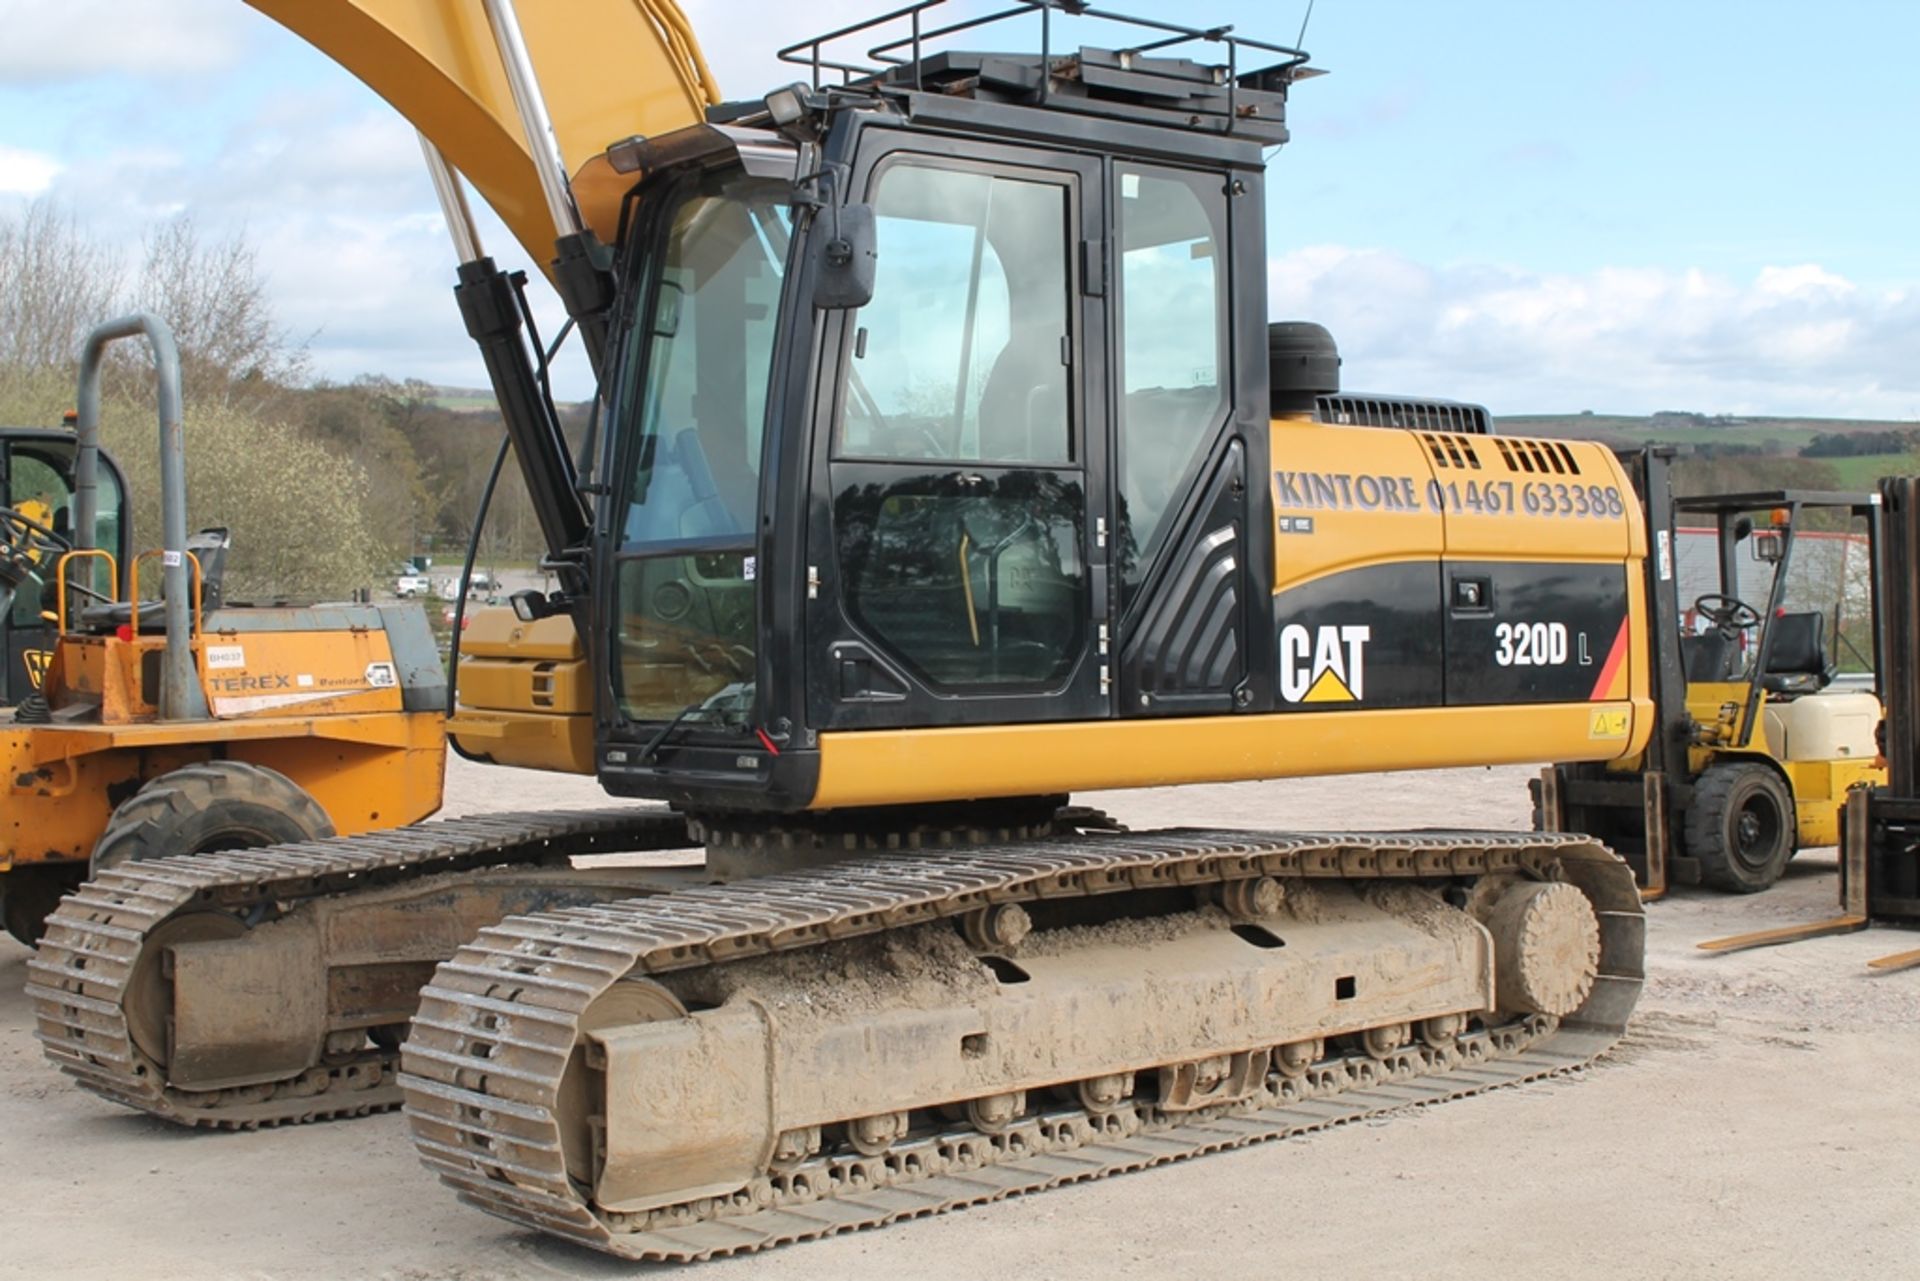 CATERPILLAR 320DL, NOV- 2010, 9108HRS, New tracks & sprockets fitted March 2016, PLUS VAT, , H - Image 3 of 9